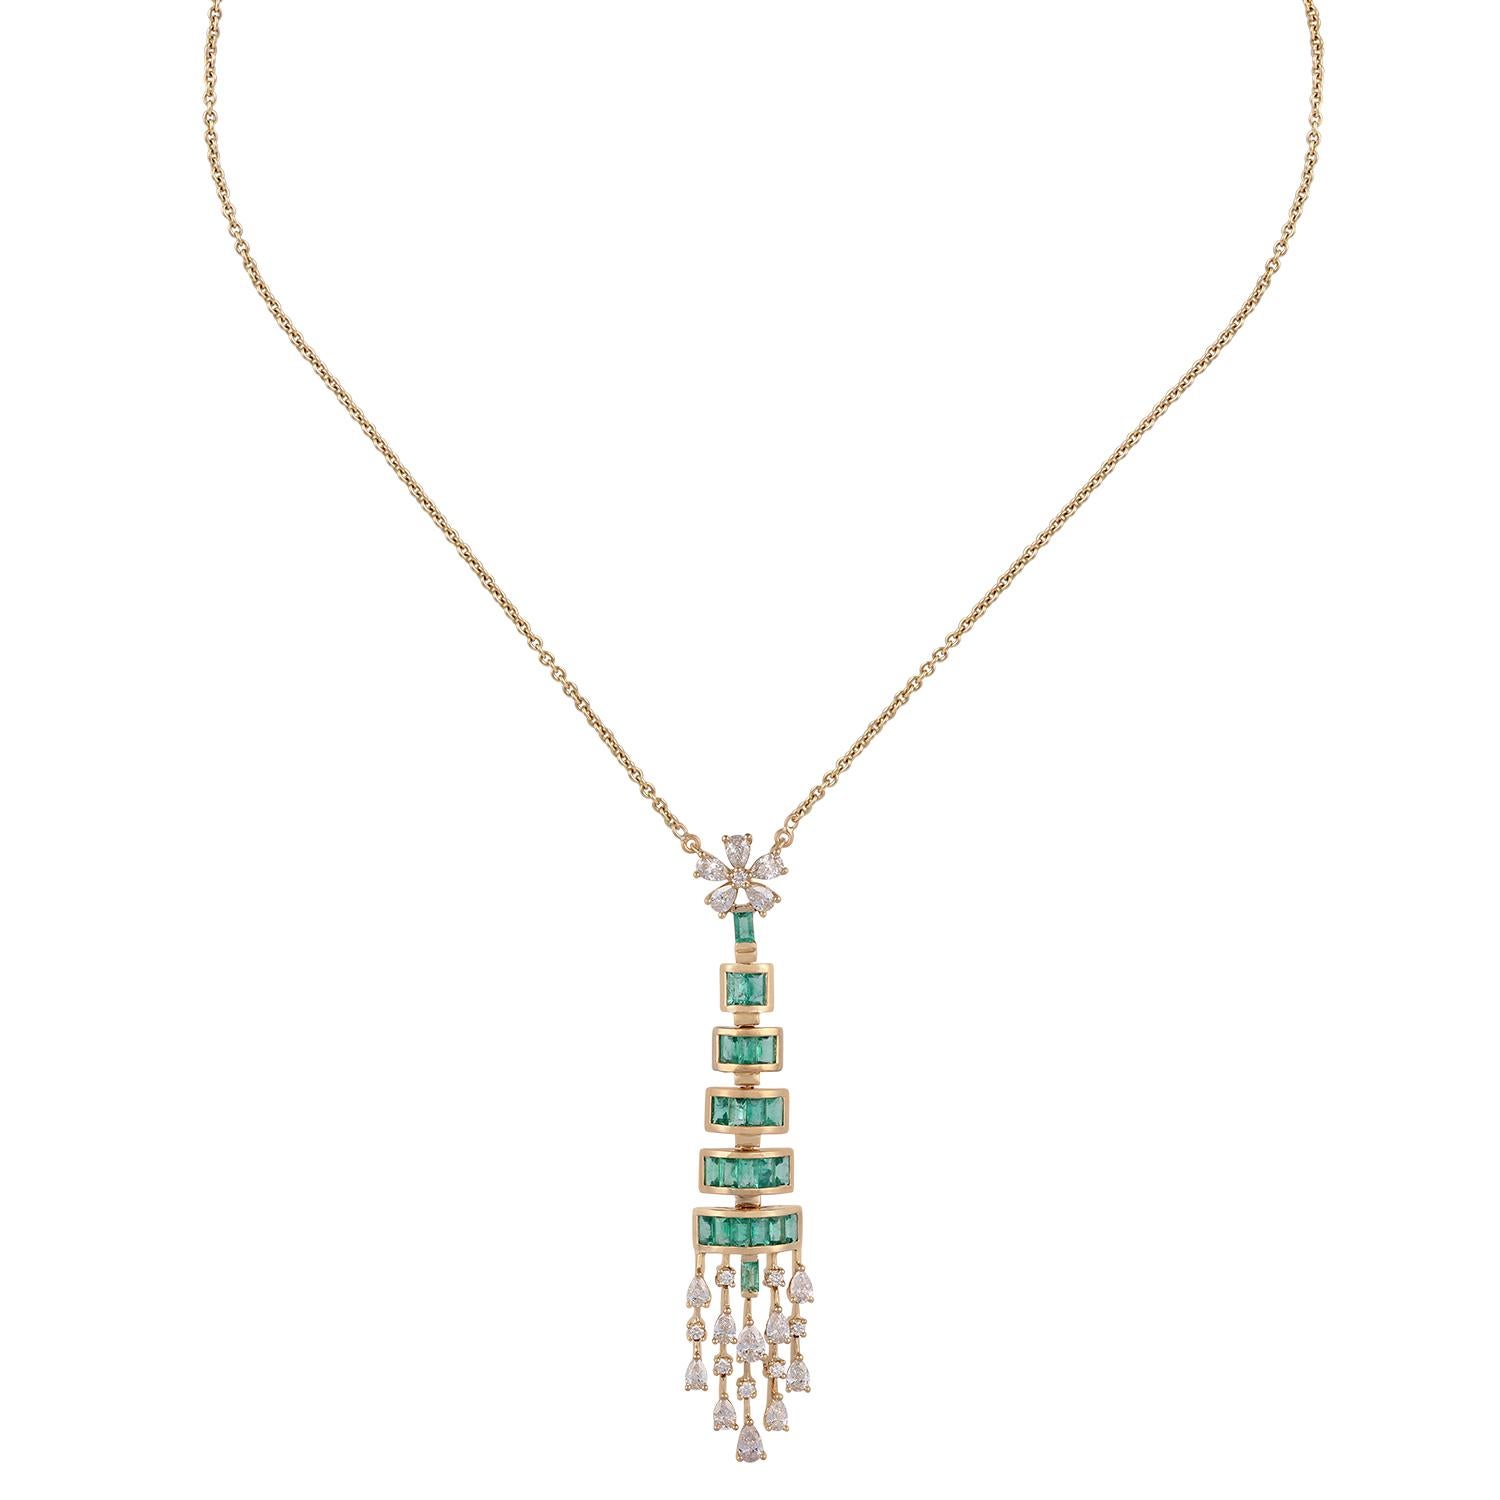 Contemporary Emerald and Diamond Pendant Necklace Studded in 18 Karat Yellow Gold